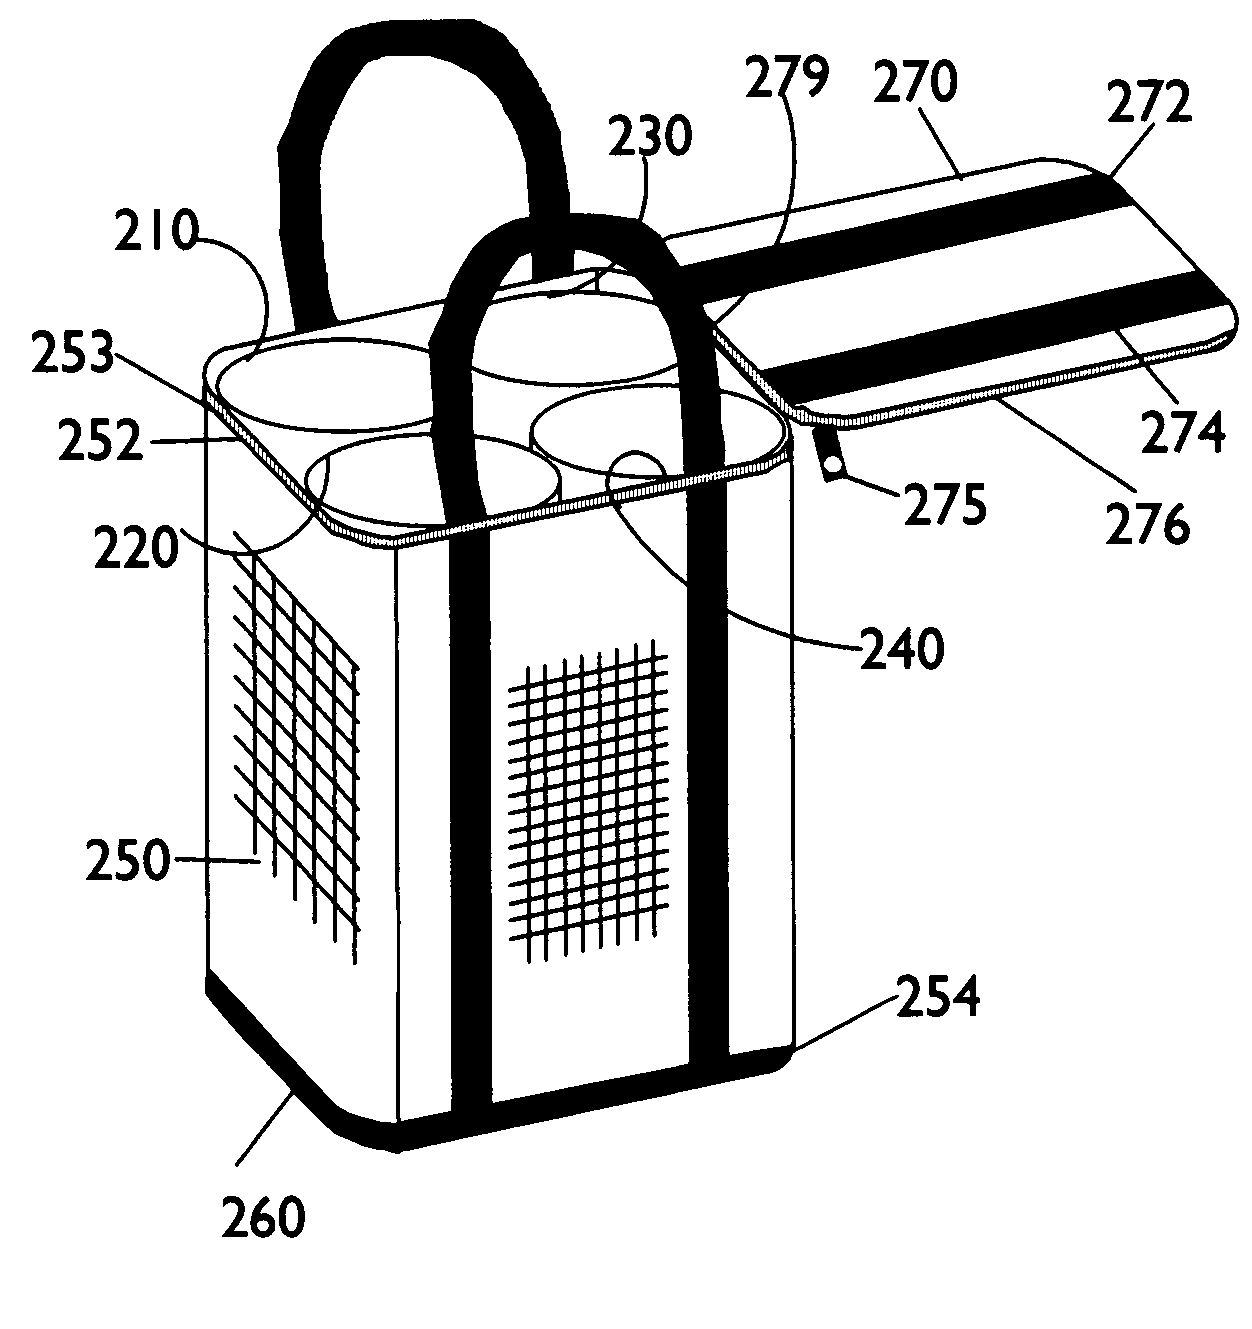 Cylindrical container bags